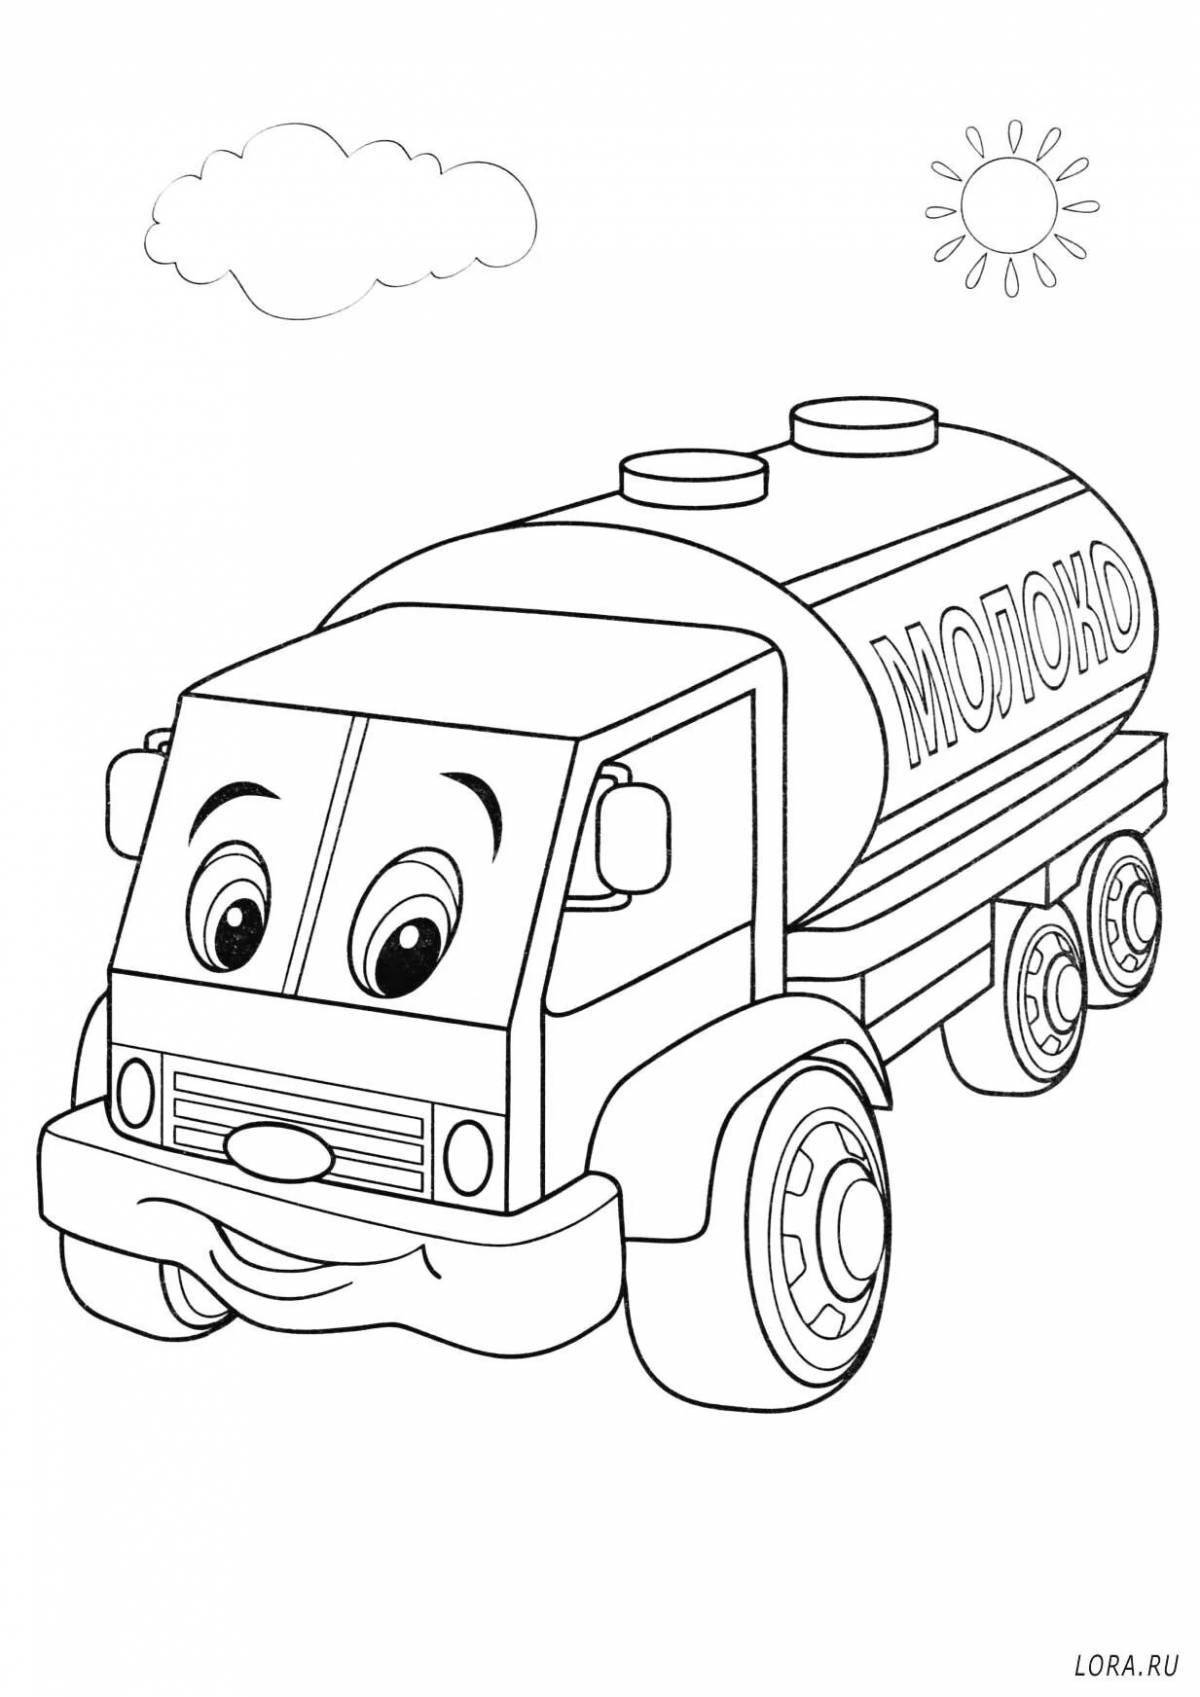 Colored milk splatter coloring page